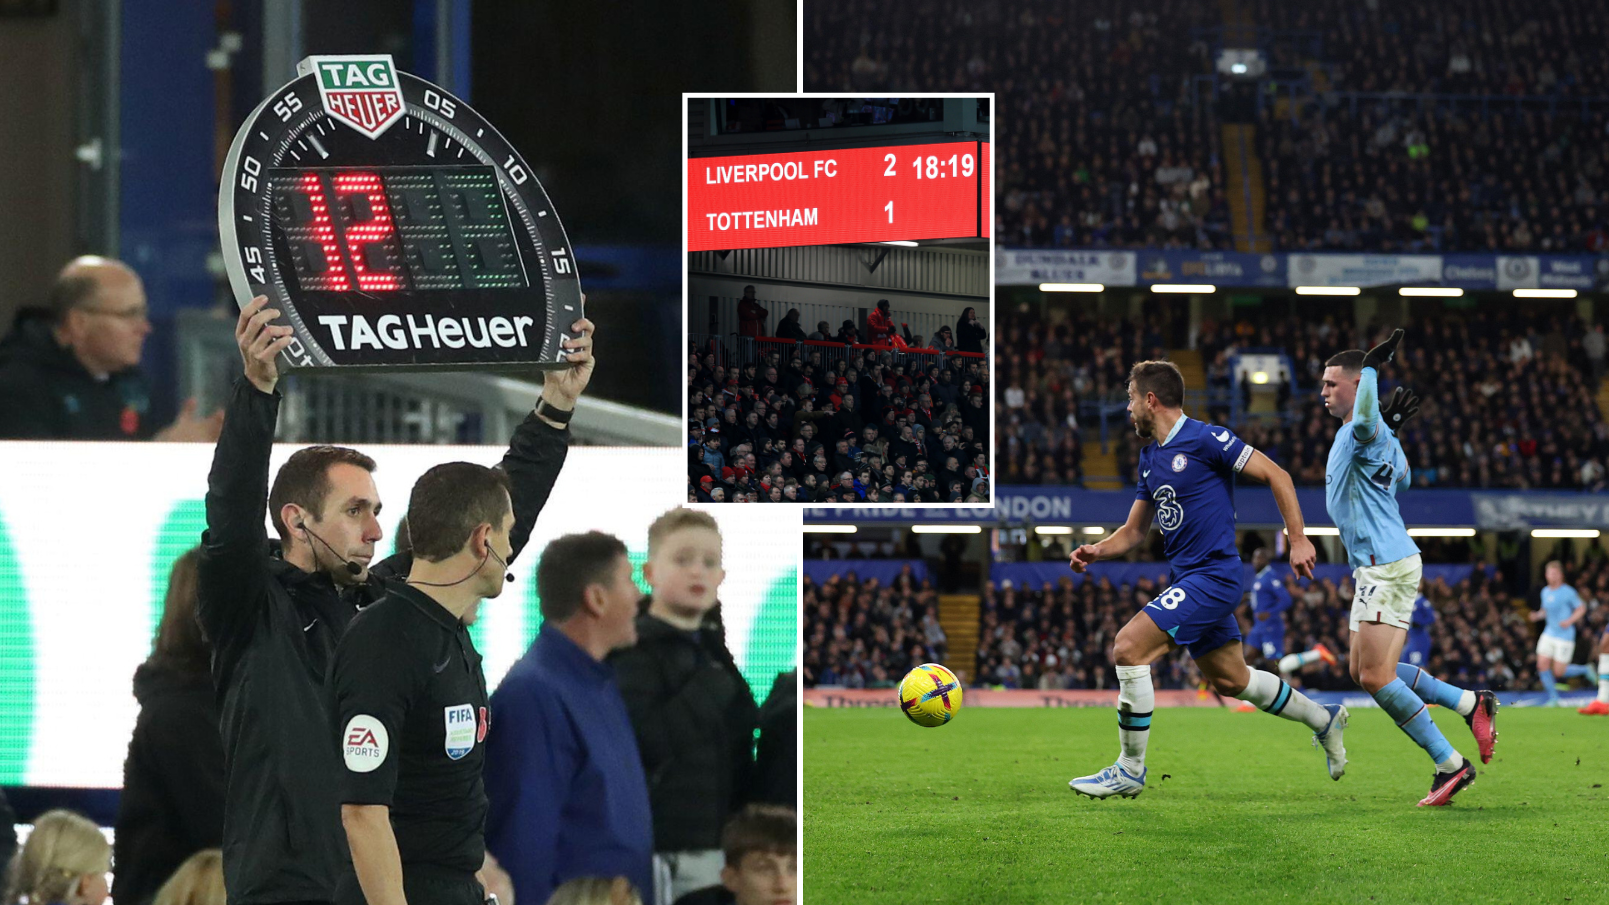 FIFA reportedly considering a new 'game clock' rule in football to put an end to time-wasting